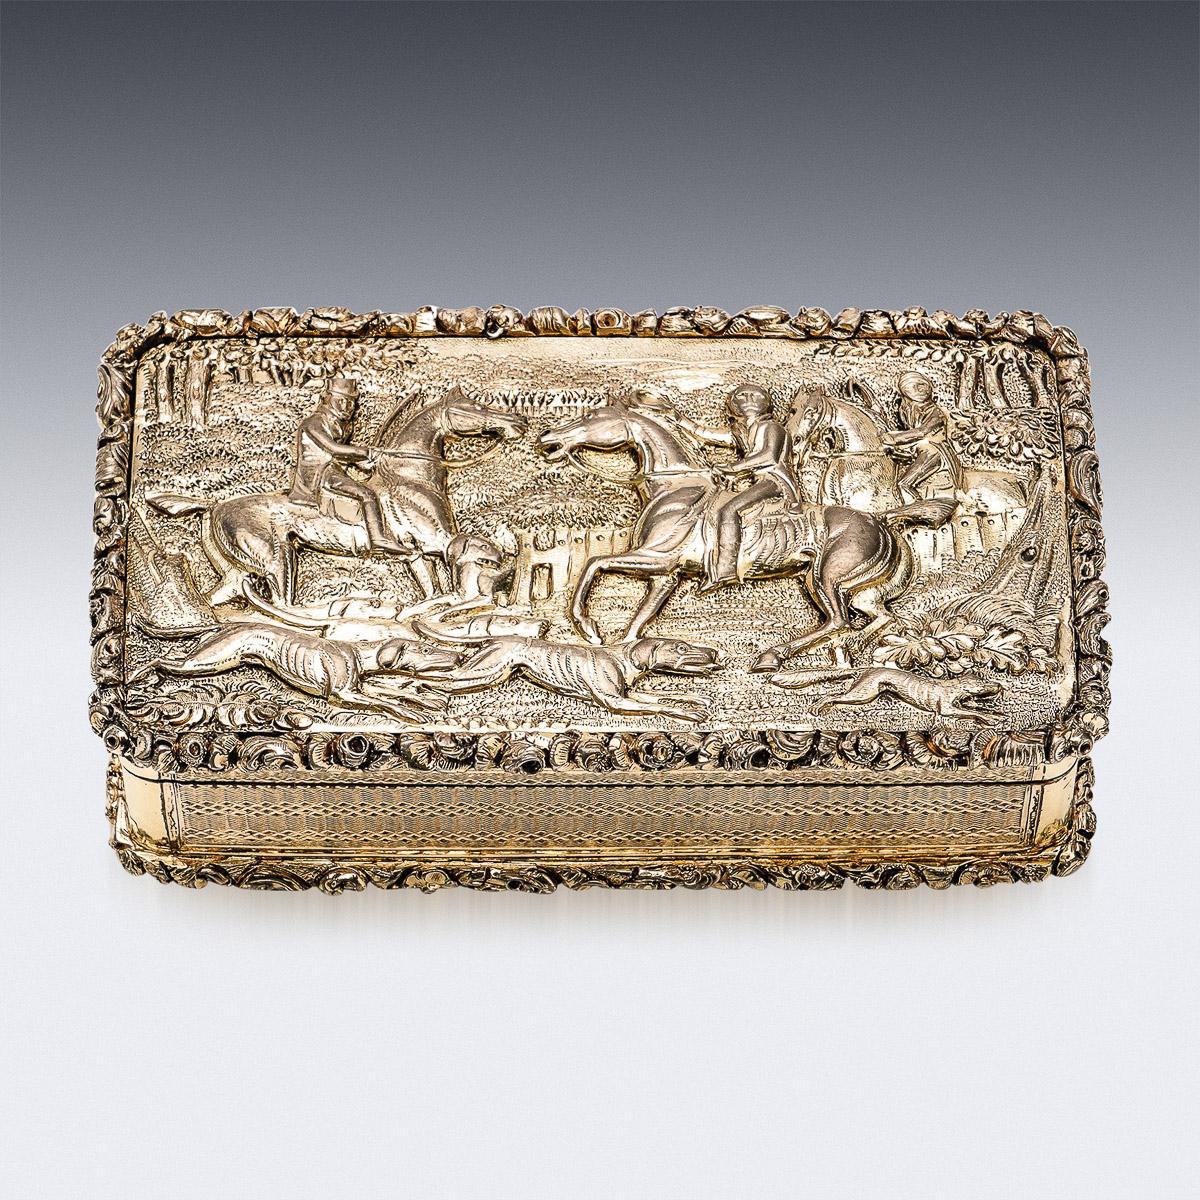 Antique 19th Georgian solid silver-gilt large snuff box, impressive size and heavy gauge, cover chased in high relief depicting a hunting scene, with a pronounced floral boarders to both sides and engine turned decoration. Hallmarked English silver